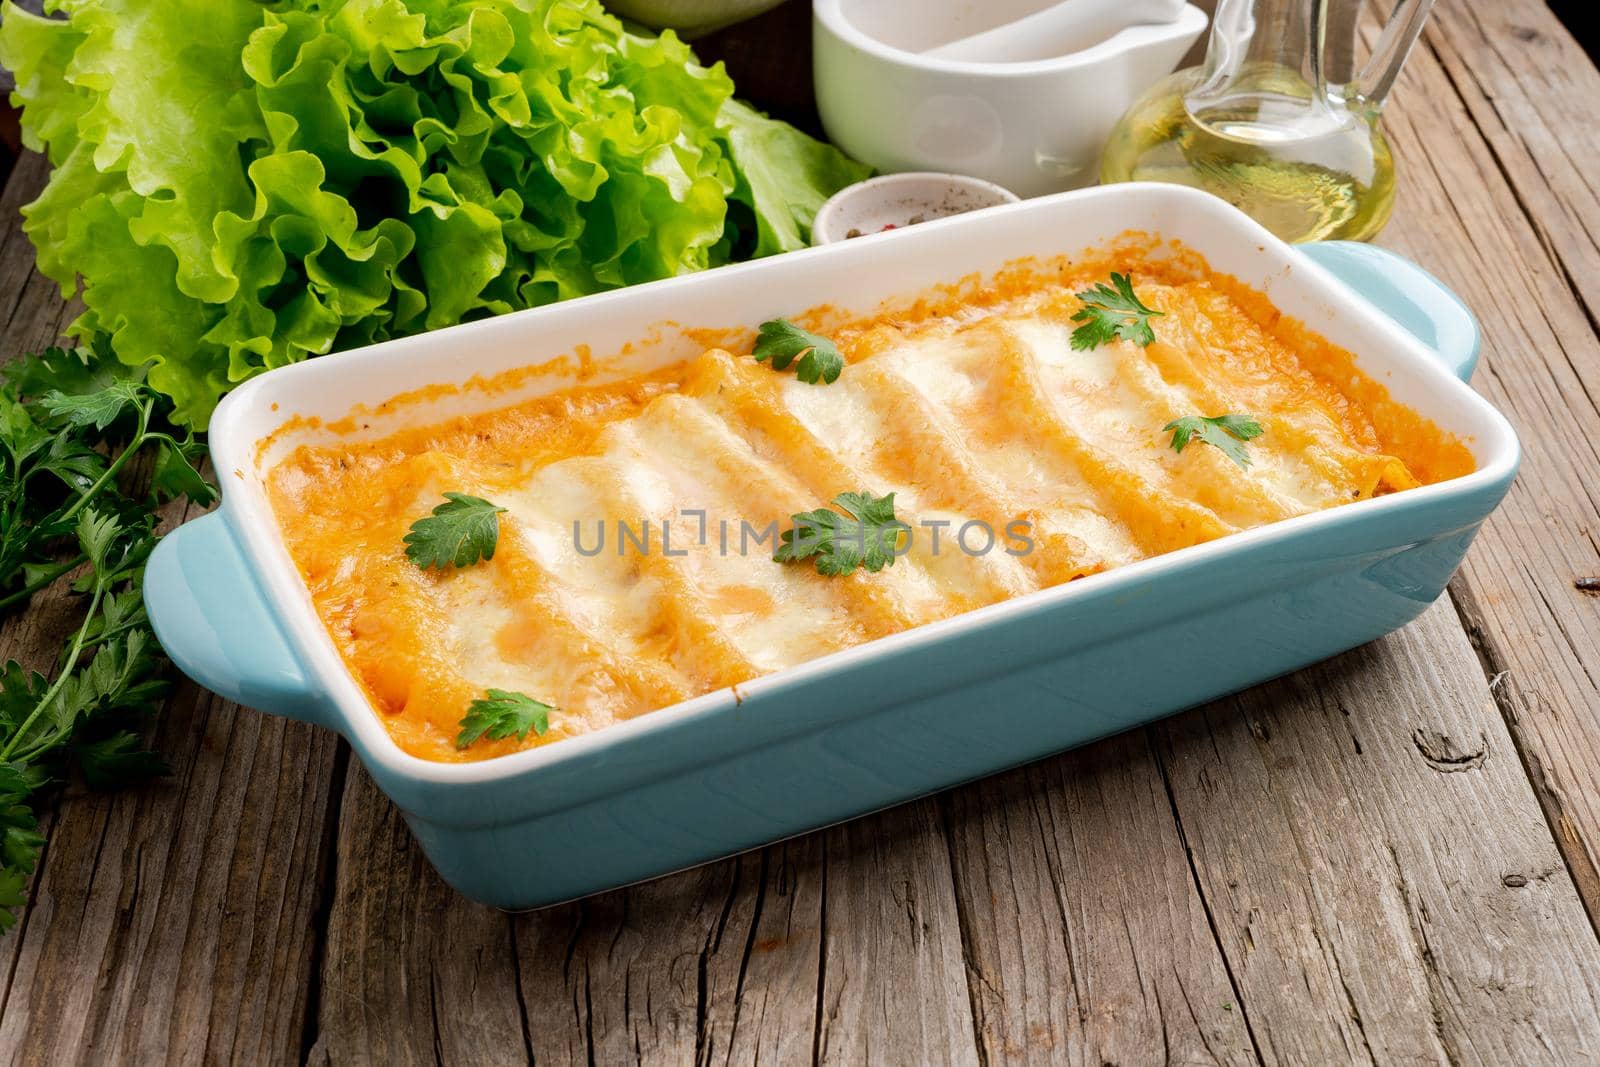 Cannelloni with filling of ground beef, tomatoes, baked with bechamel tomato sauce, side view, old dark wooden background